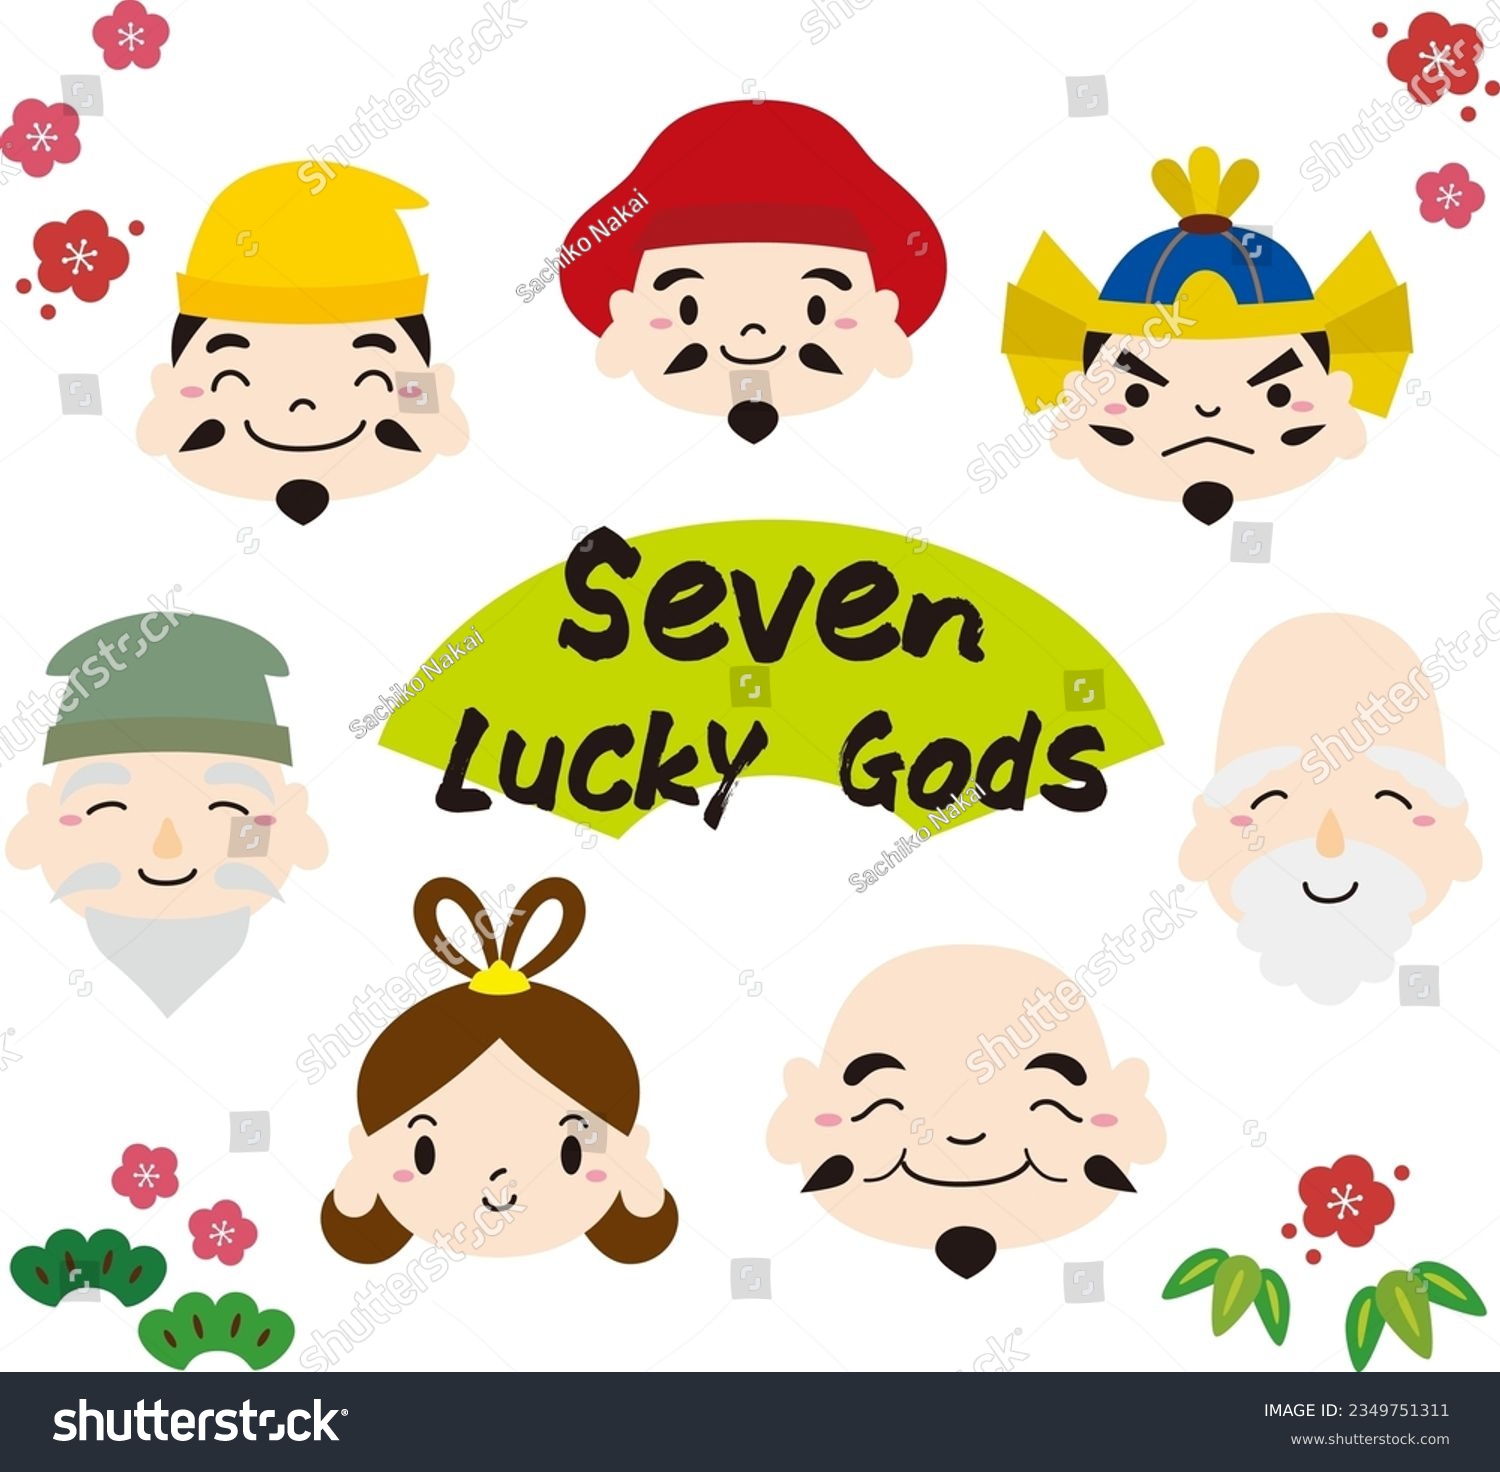 SVG of Cute Seven Gods of Good Luck Character Face Illustration without border svg